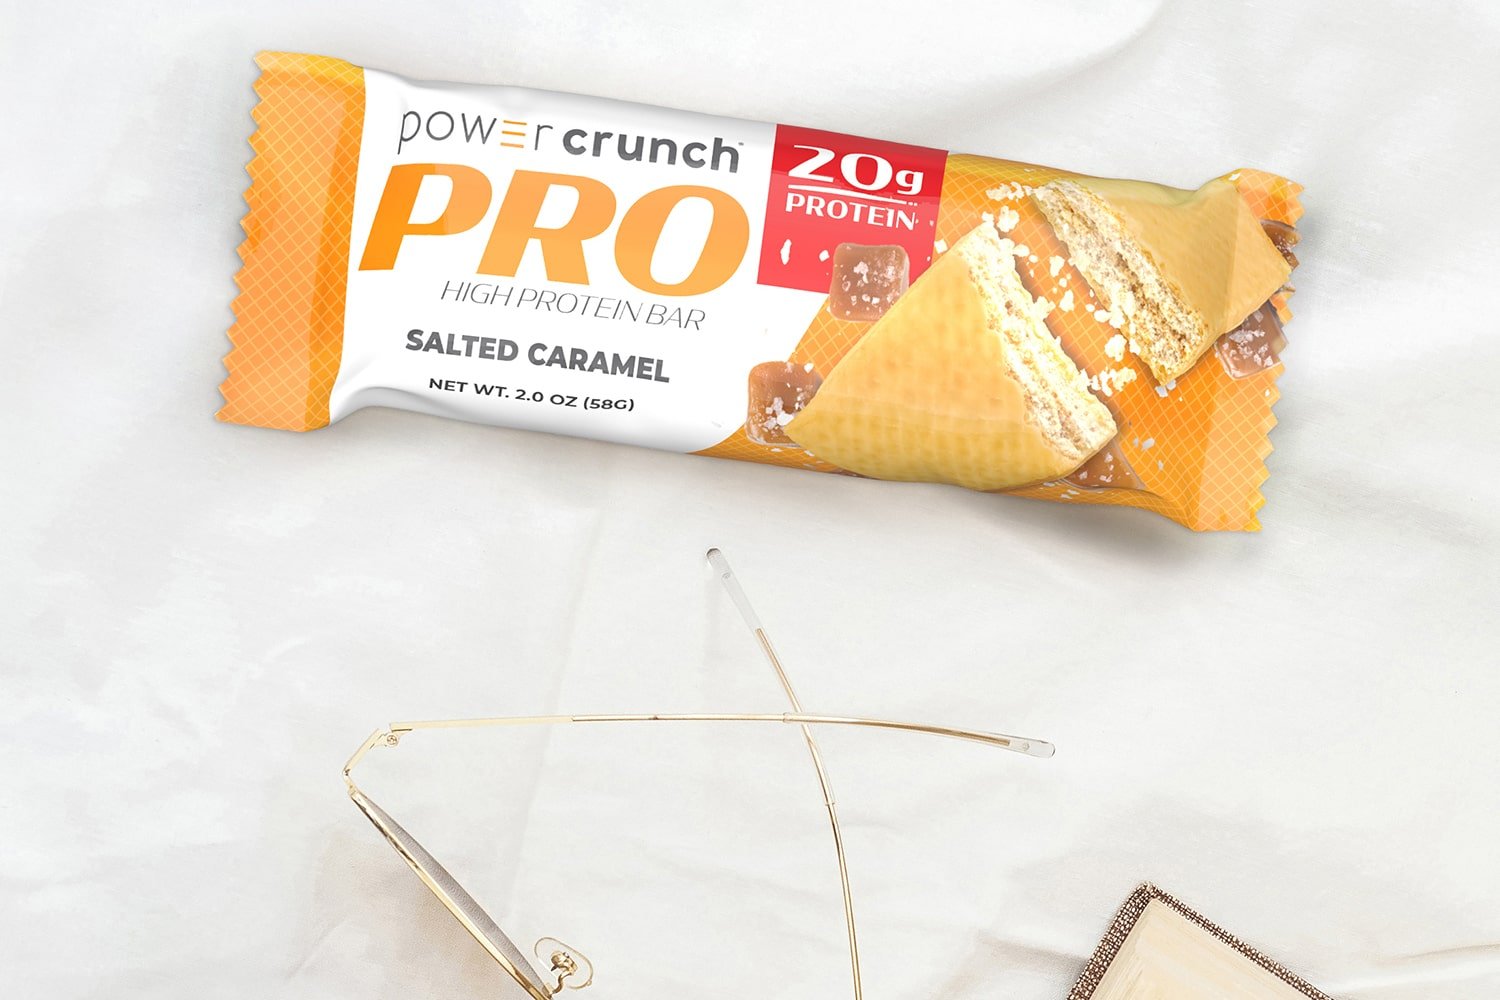 Salted Caramel high protein bars as an on-the-go snack